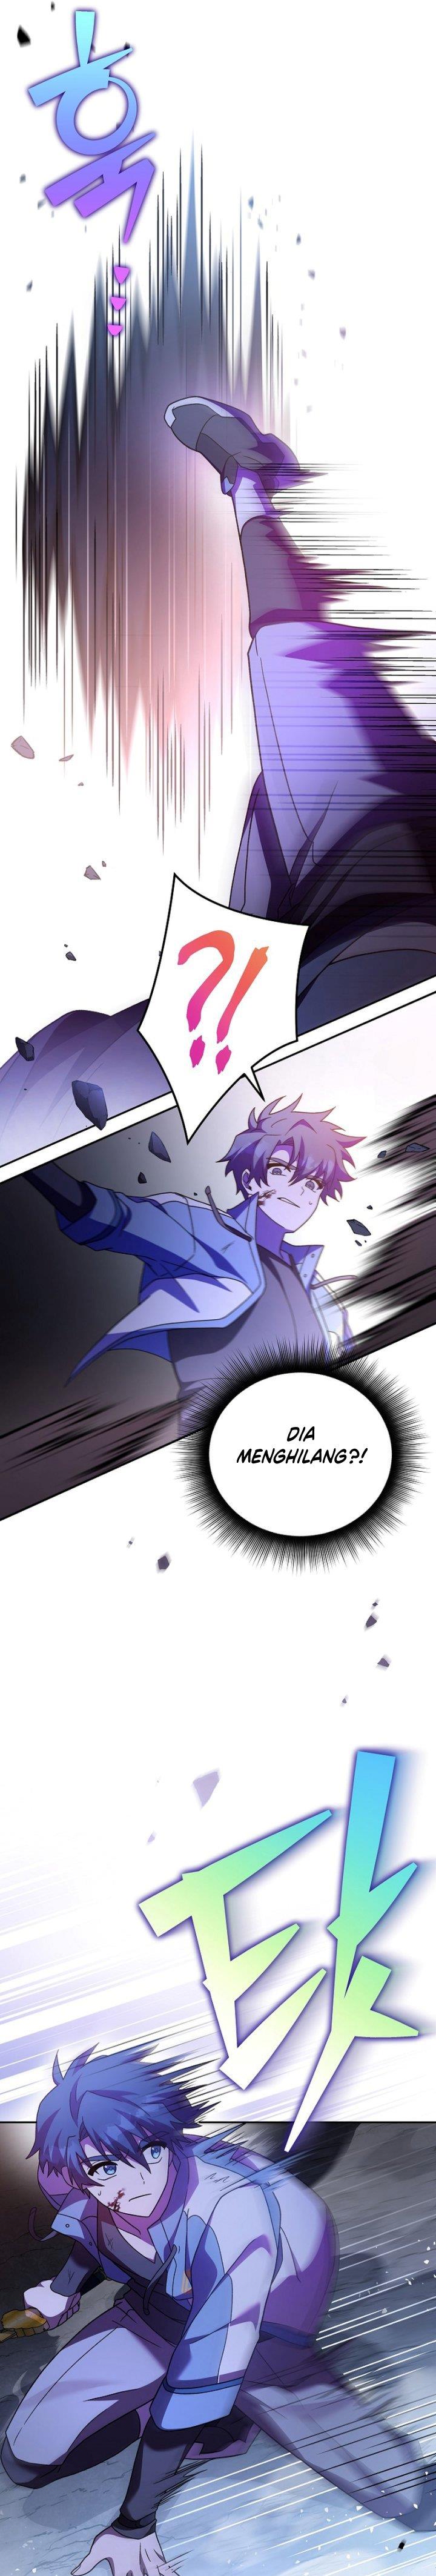 The Novel’s Extra Chapter 82